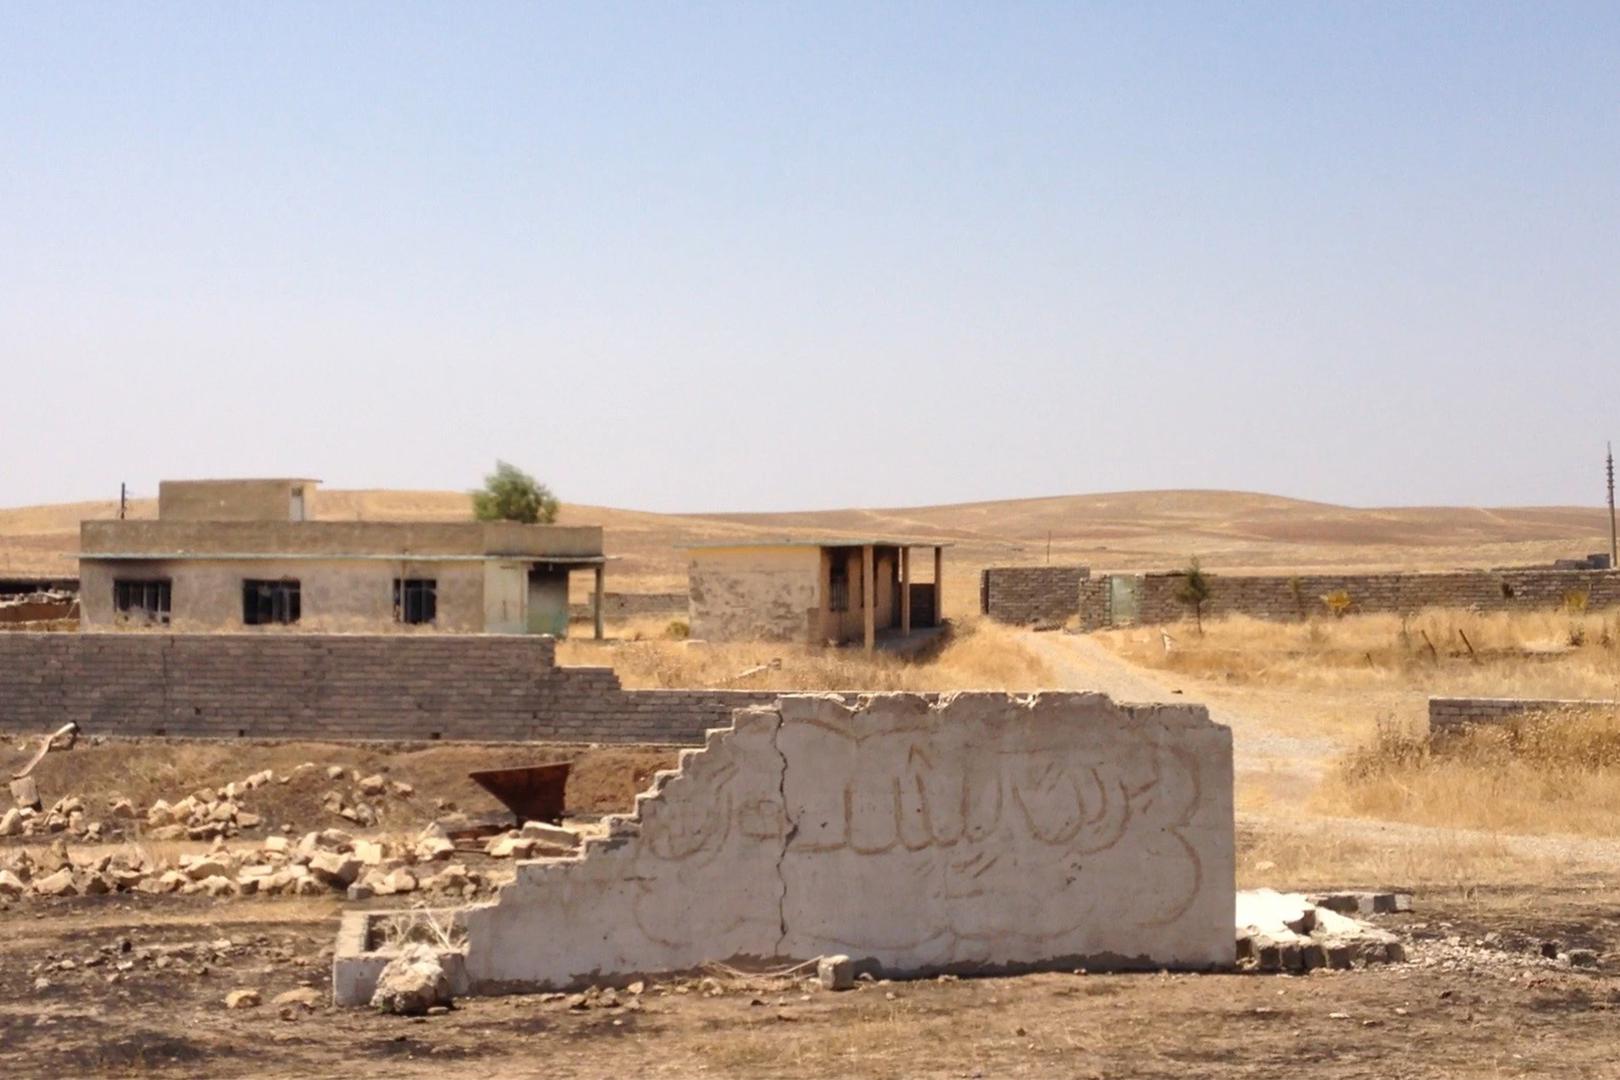 Torched and demolished houses in Sheikhan with graffiti on destroyed wall “long live the Peshmerga.” 